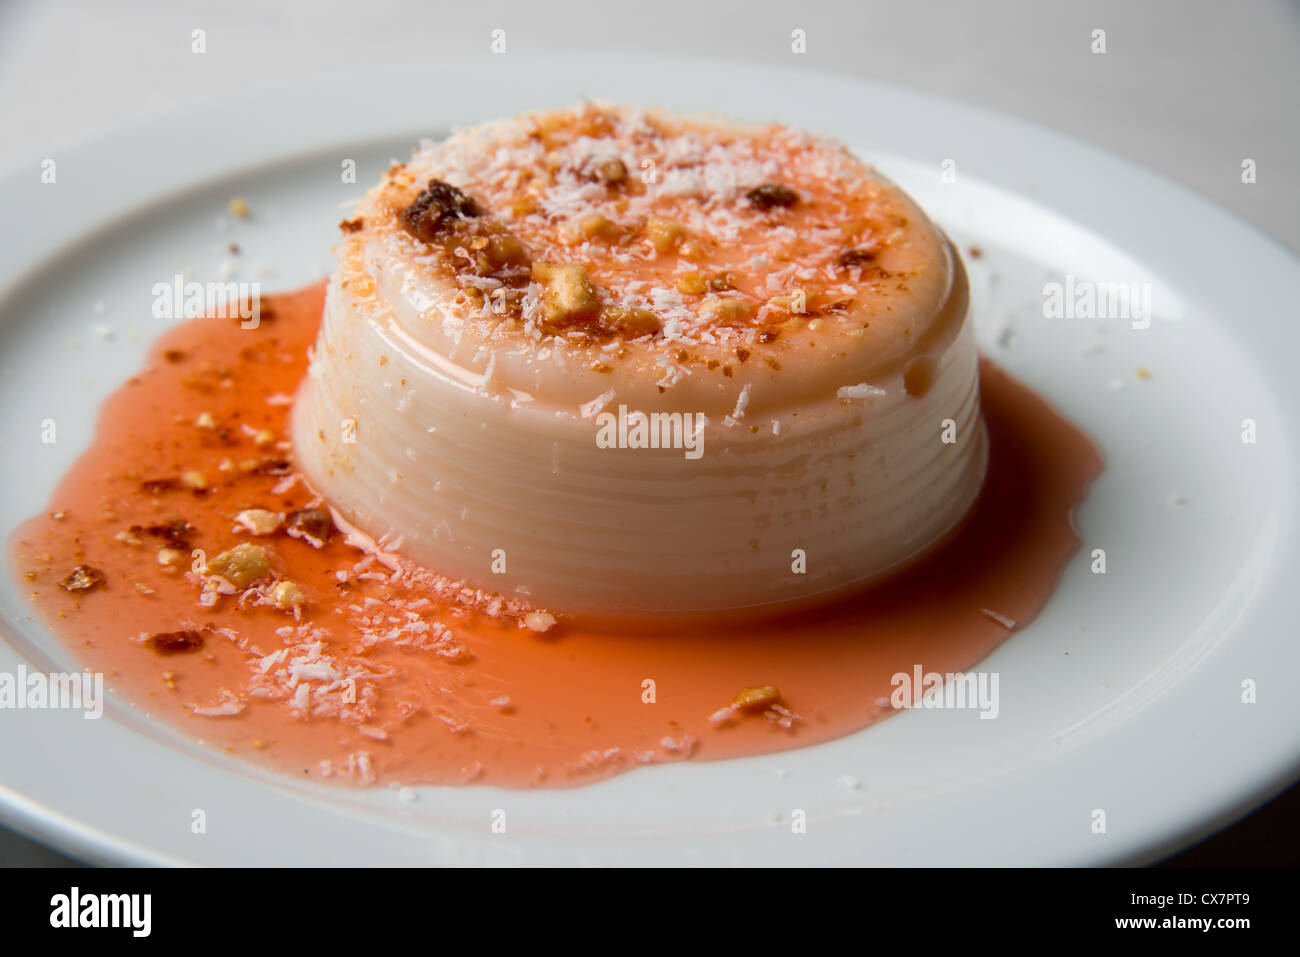 Blancmange (Malabi or Malaby) is a sweet dessert commonly made with milk or cream and sugar Stock Photo